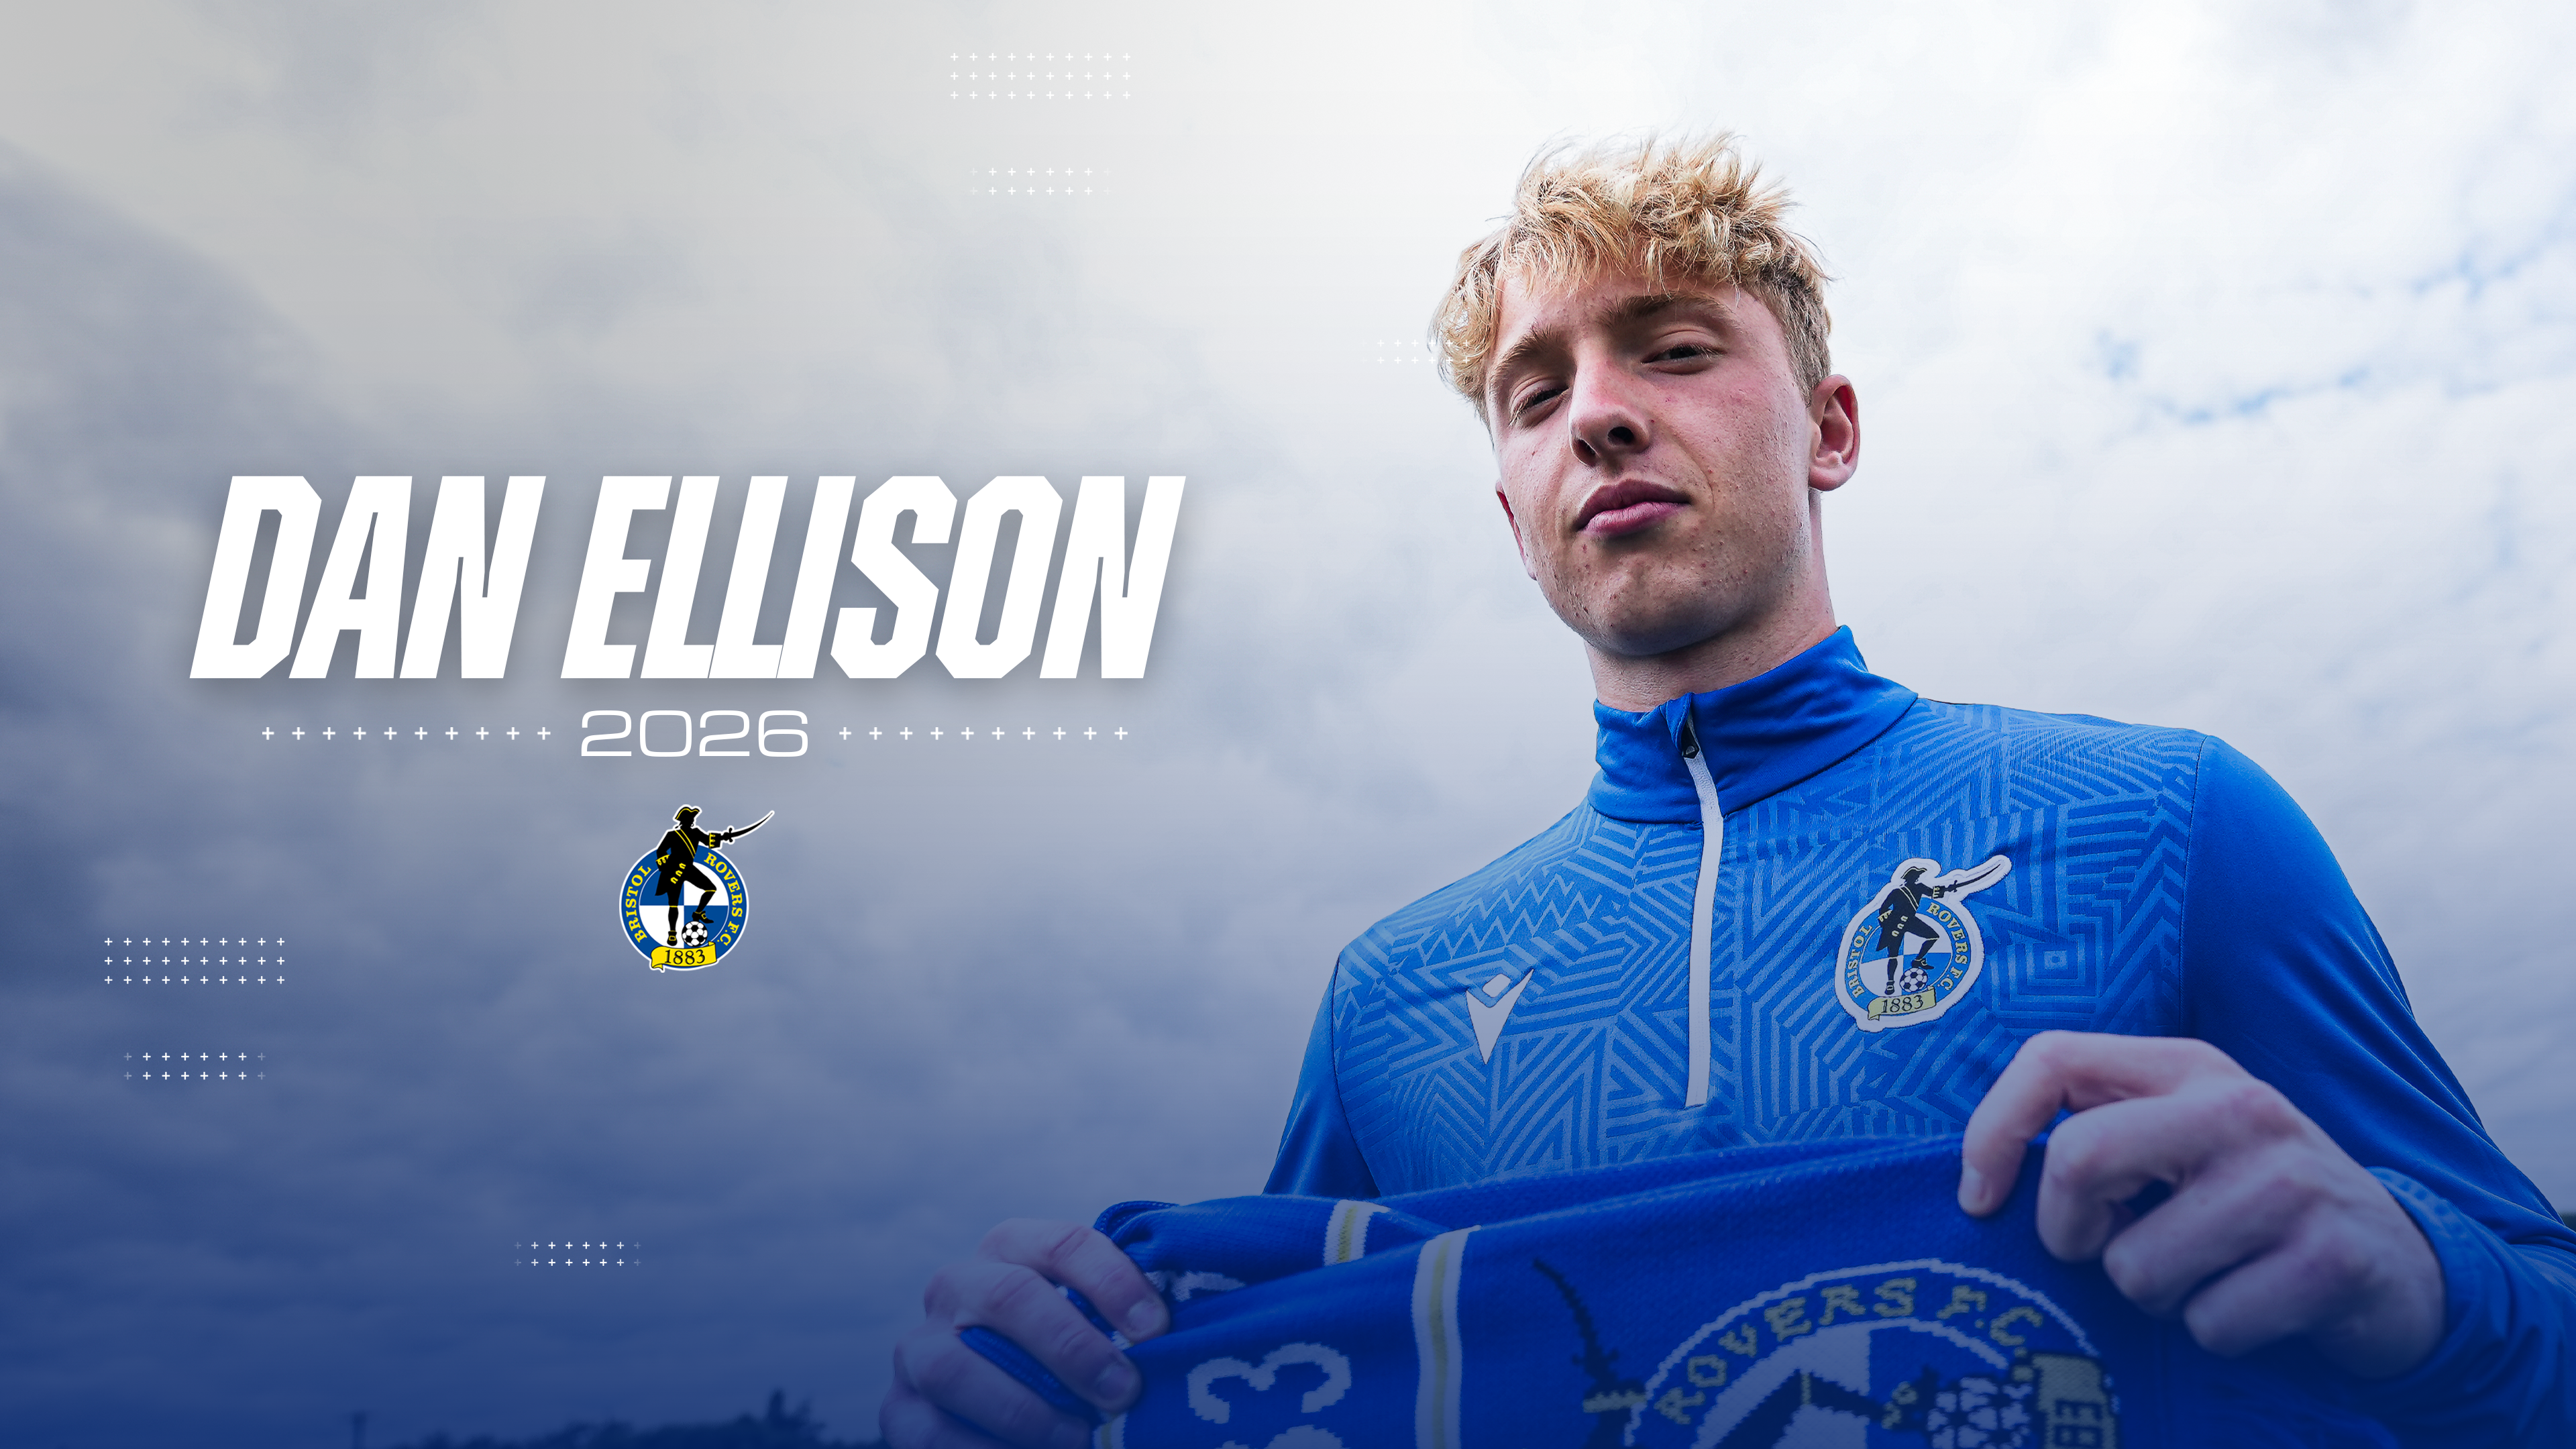 Dan Ellison signs for Rovers